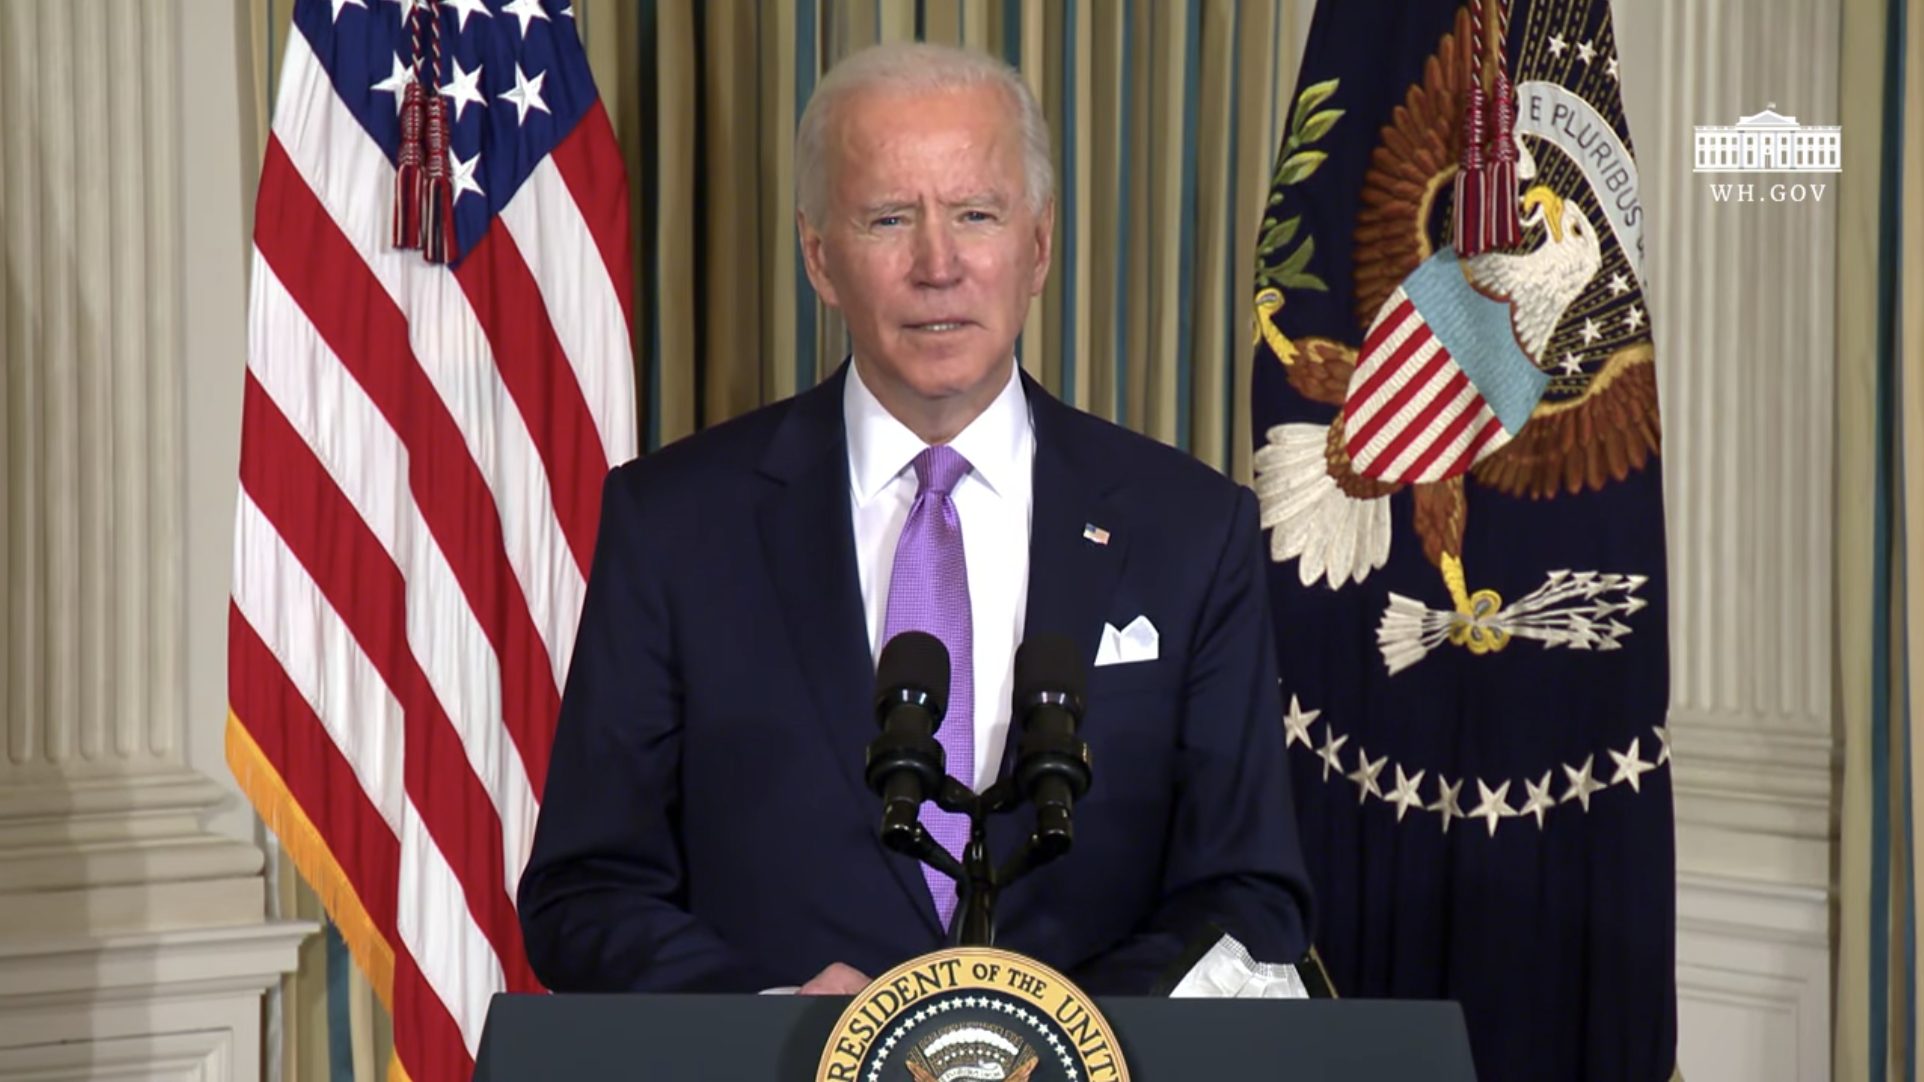 civilrights.org: Biden Executive Actions on Racial Equity Are Important First Steps